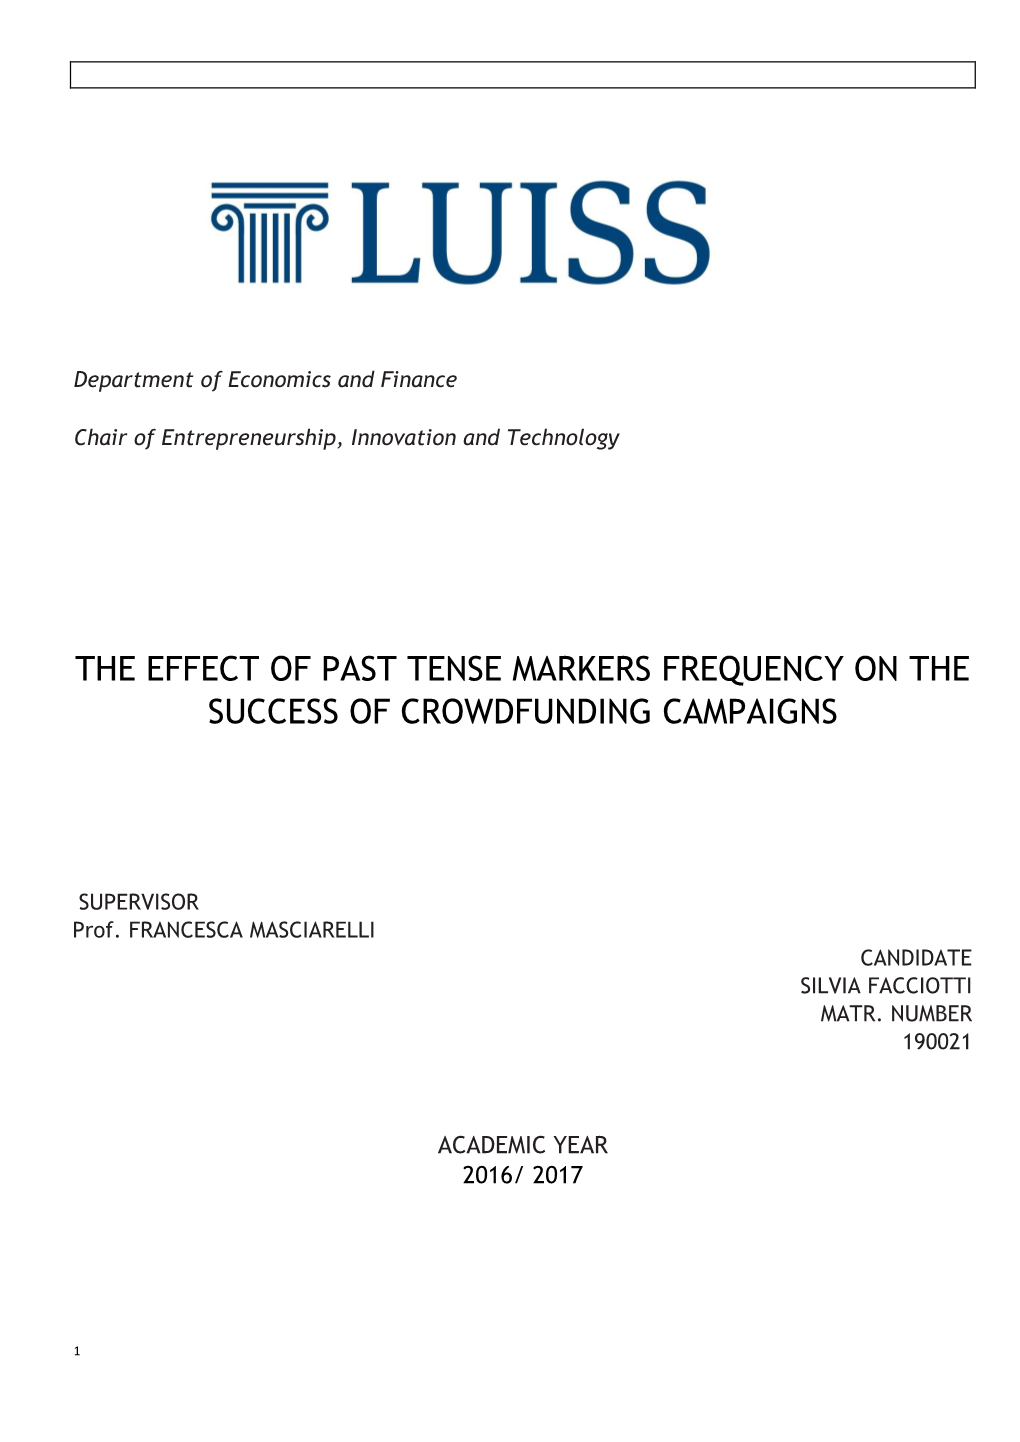 The Effect of Past Tense Markers Frequency on the Success of Crowdfunding Campaigns